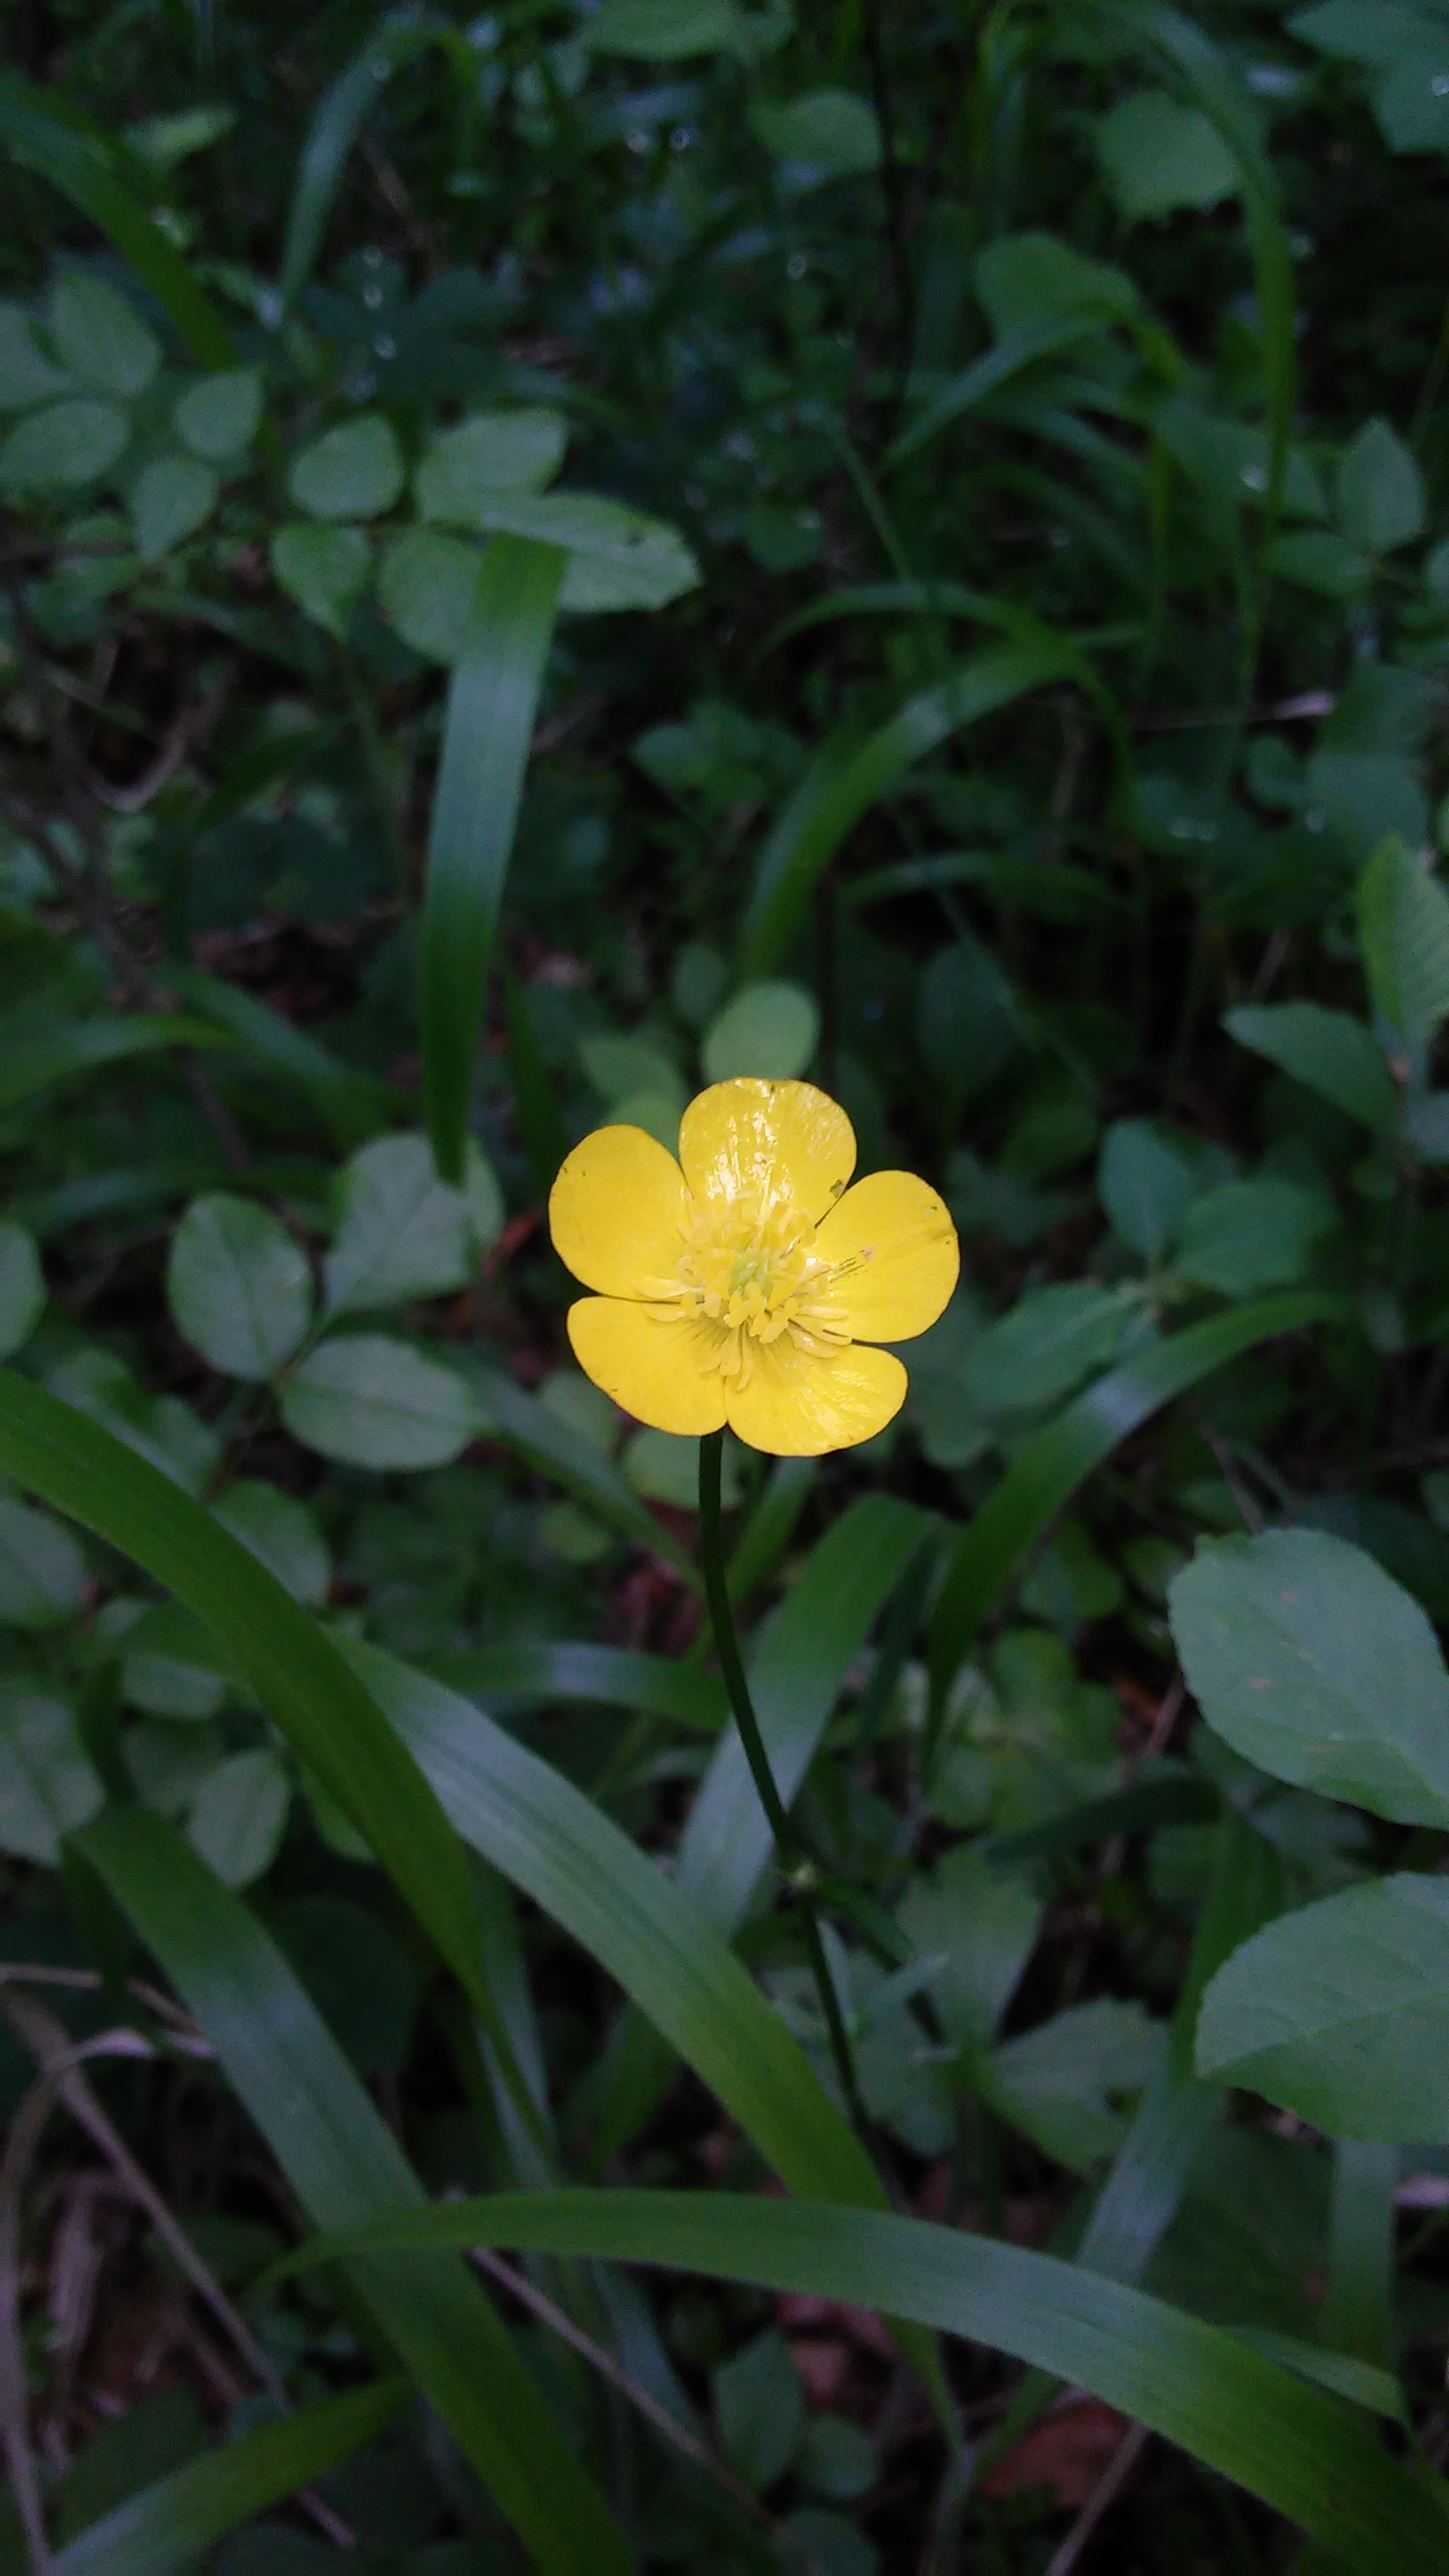 LG G2 MINI sample photo. Lonely flower photography